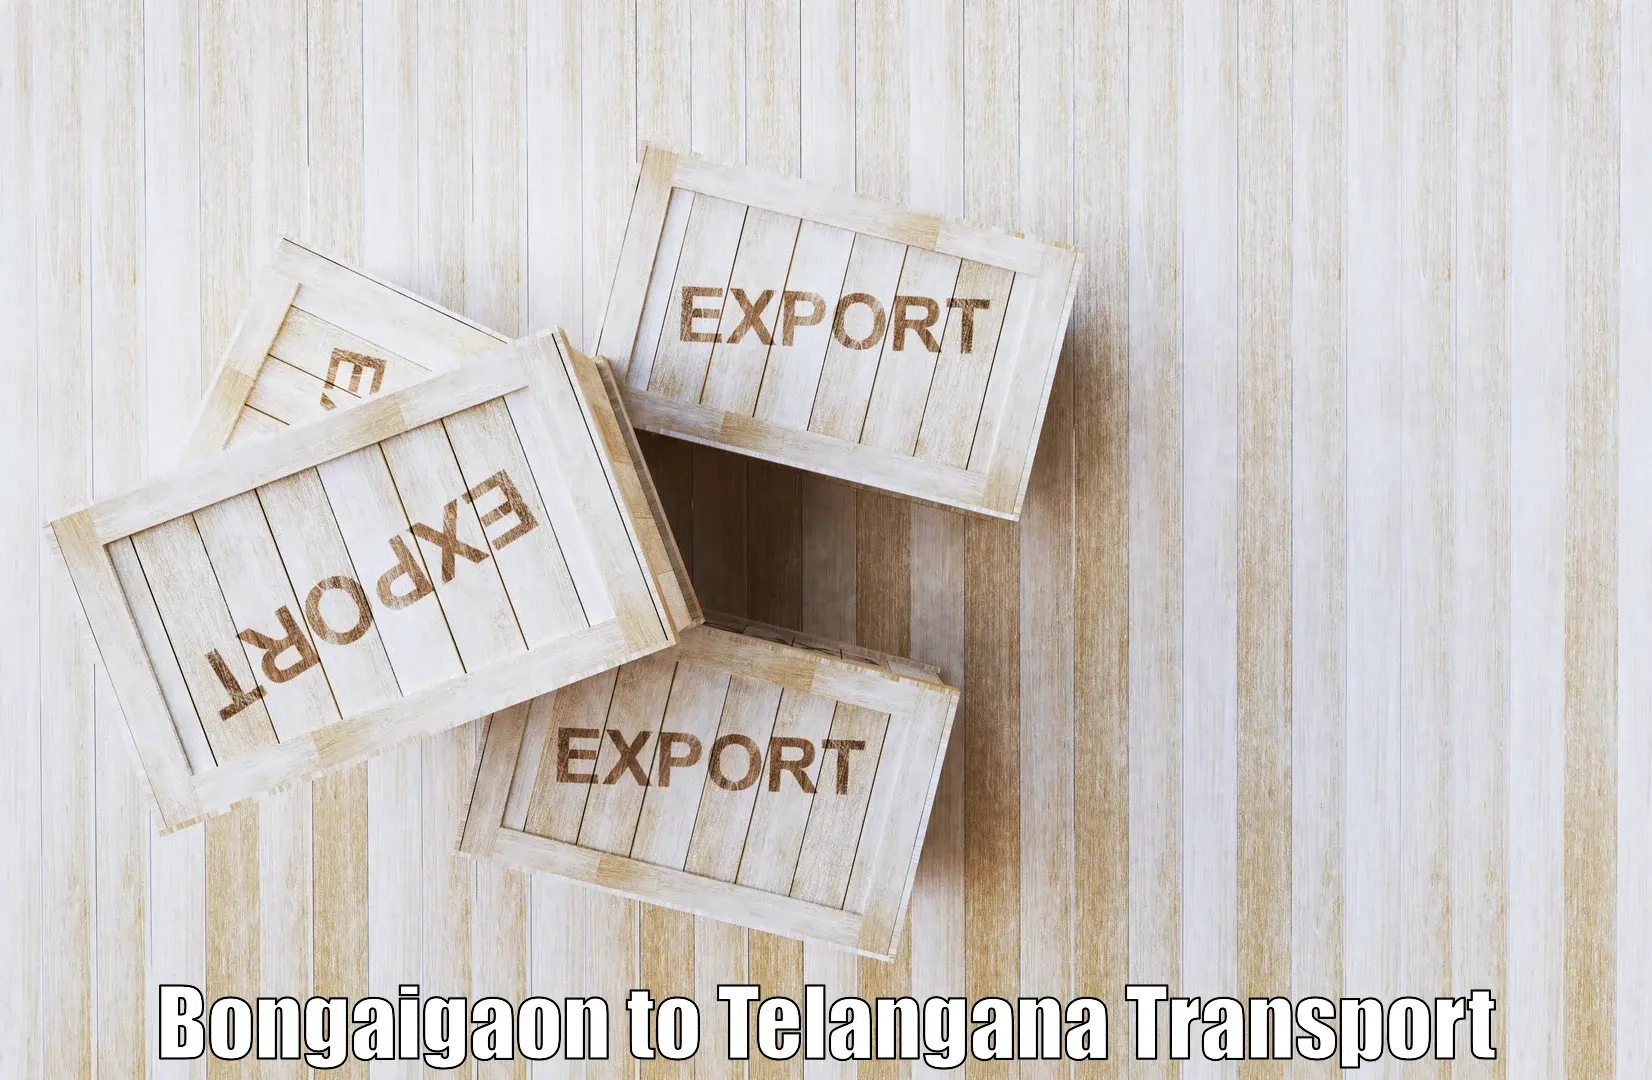 Container transport service in Bongaigaon to Kamalapur